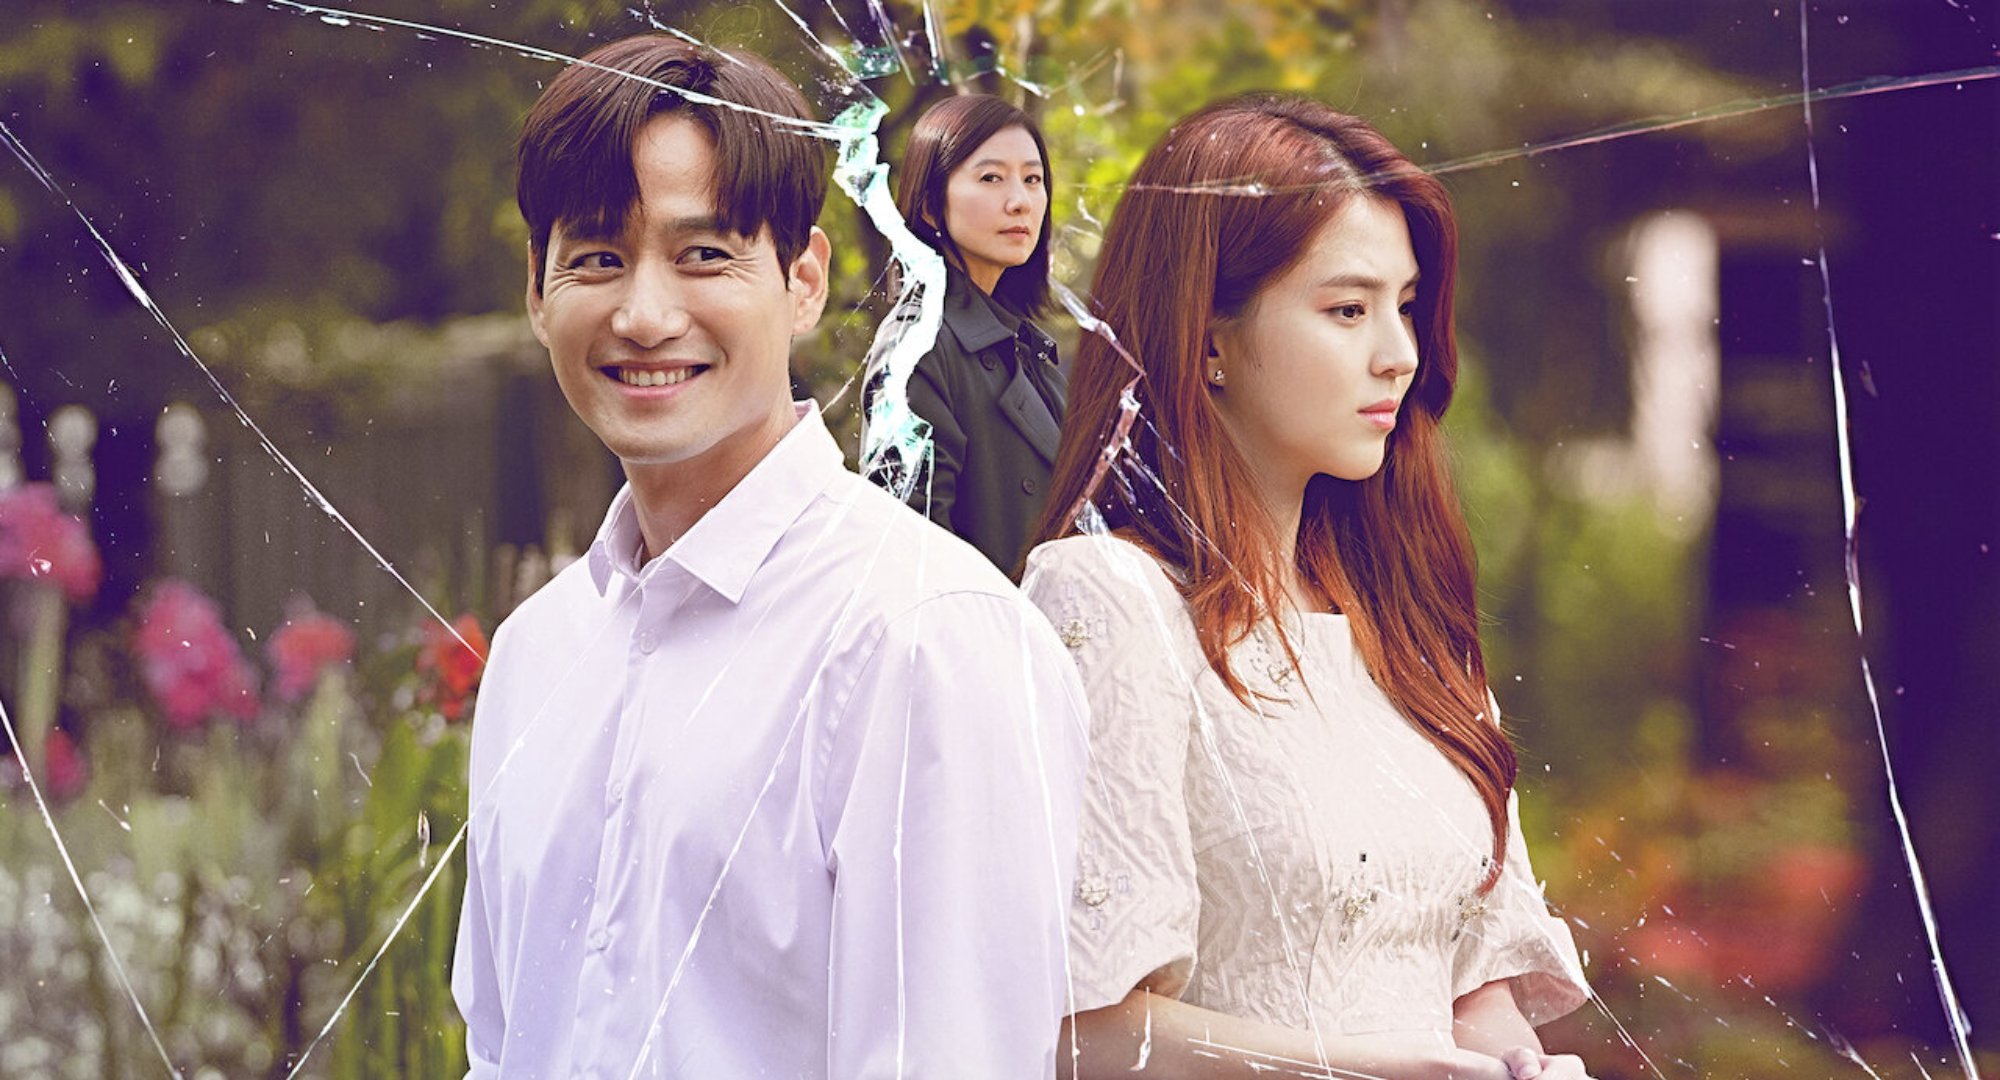 Lead characters in 'The World of the Married' makjang K-drama.